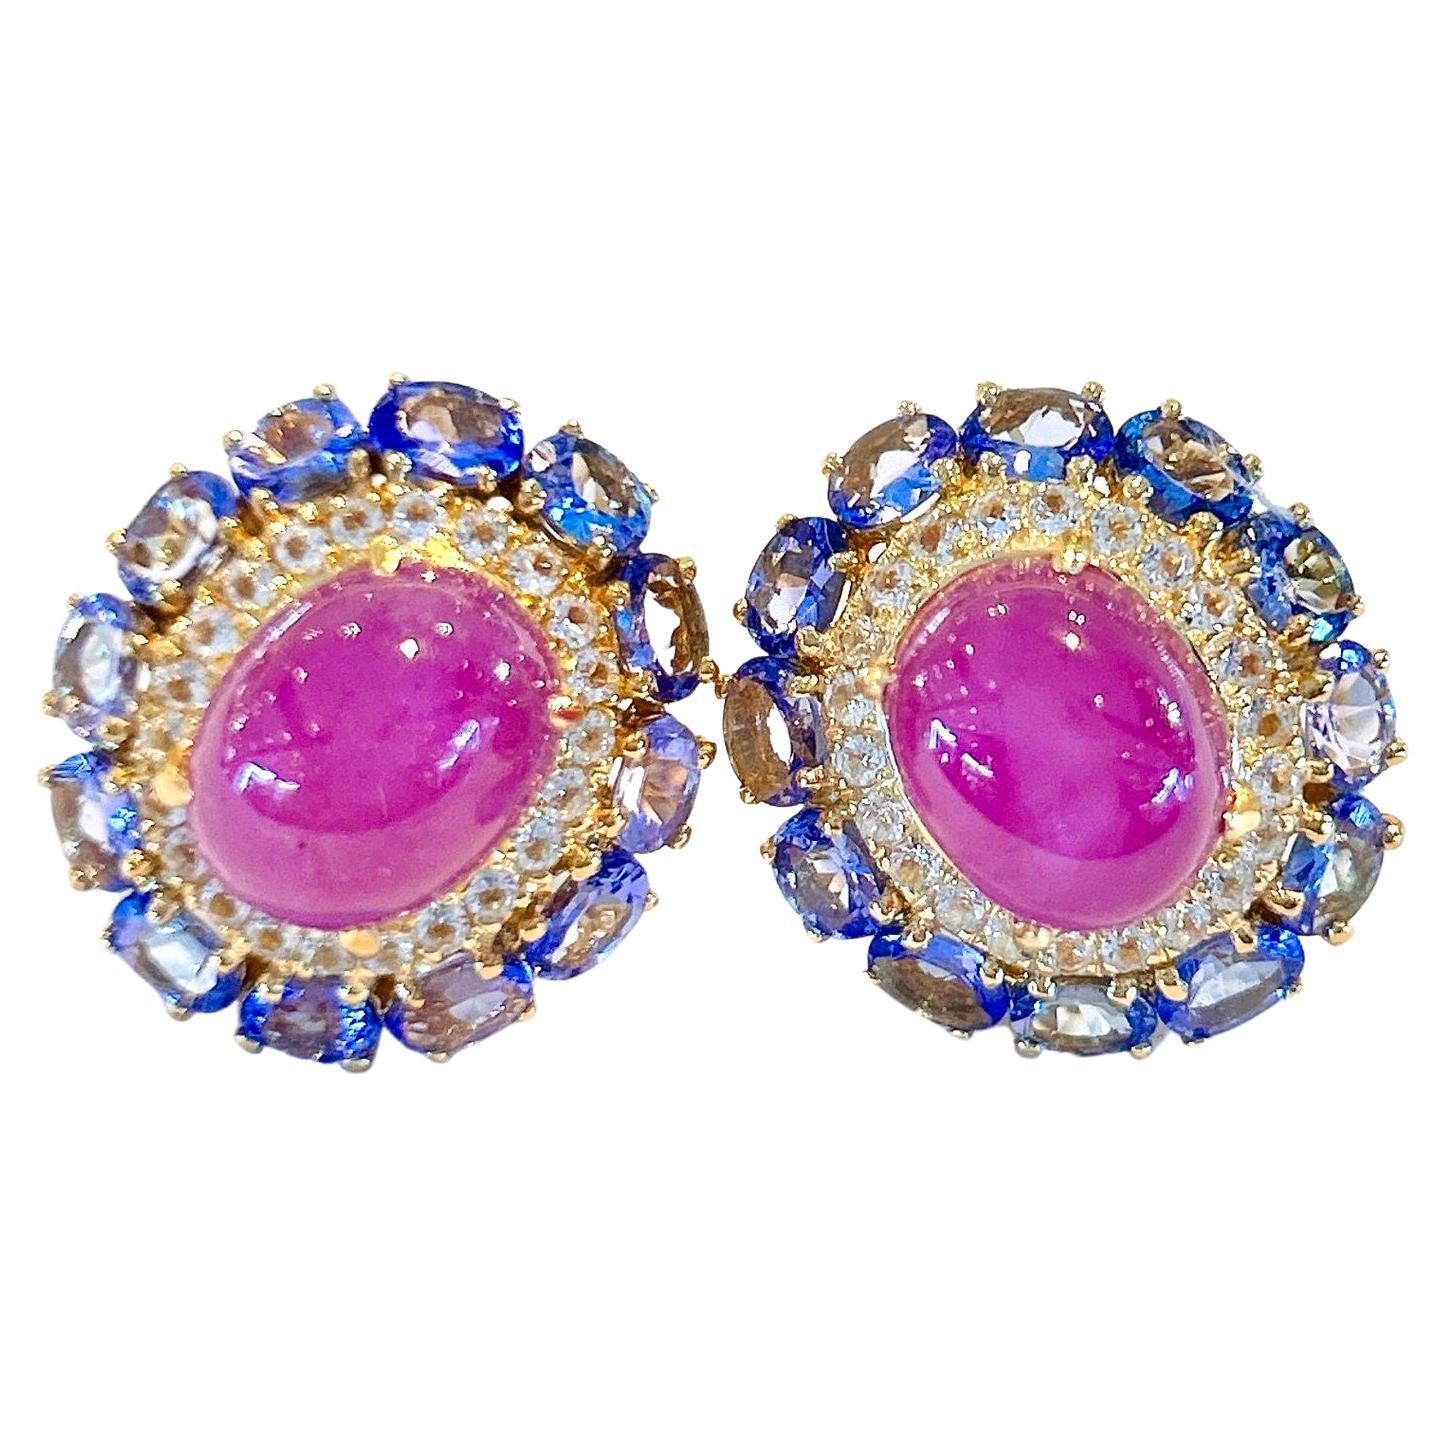 Bochic “Capri” Multi Natural Gem Cocktail  Ring & Earrings 
Natural Ruby, Colors - Red, Pink, 35 Carats 
Natural Tanzanite, Colors - Purple, 23 Carats 
Natural White Topaz, Colors - White, 15 Carats 
Set in 22K Gold and Silver 
Gem shapes;
Round